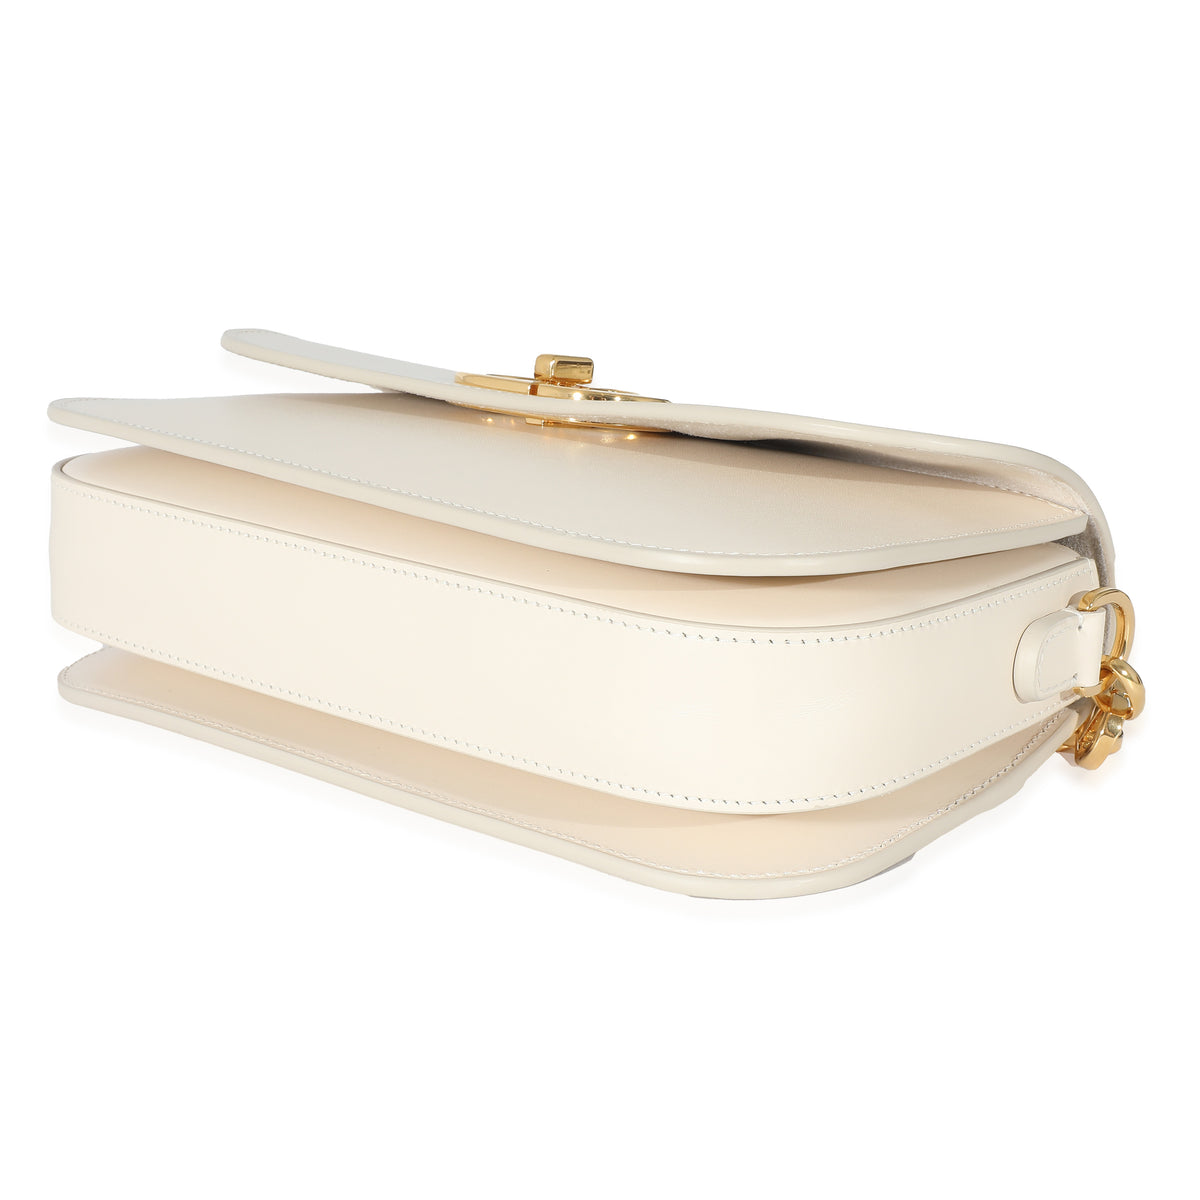 Small 30 Montaigne Bag Dusty Ivory Calfskin